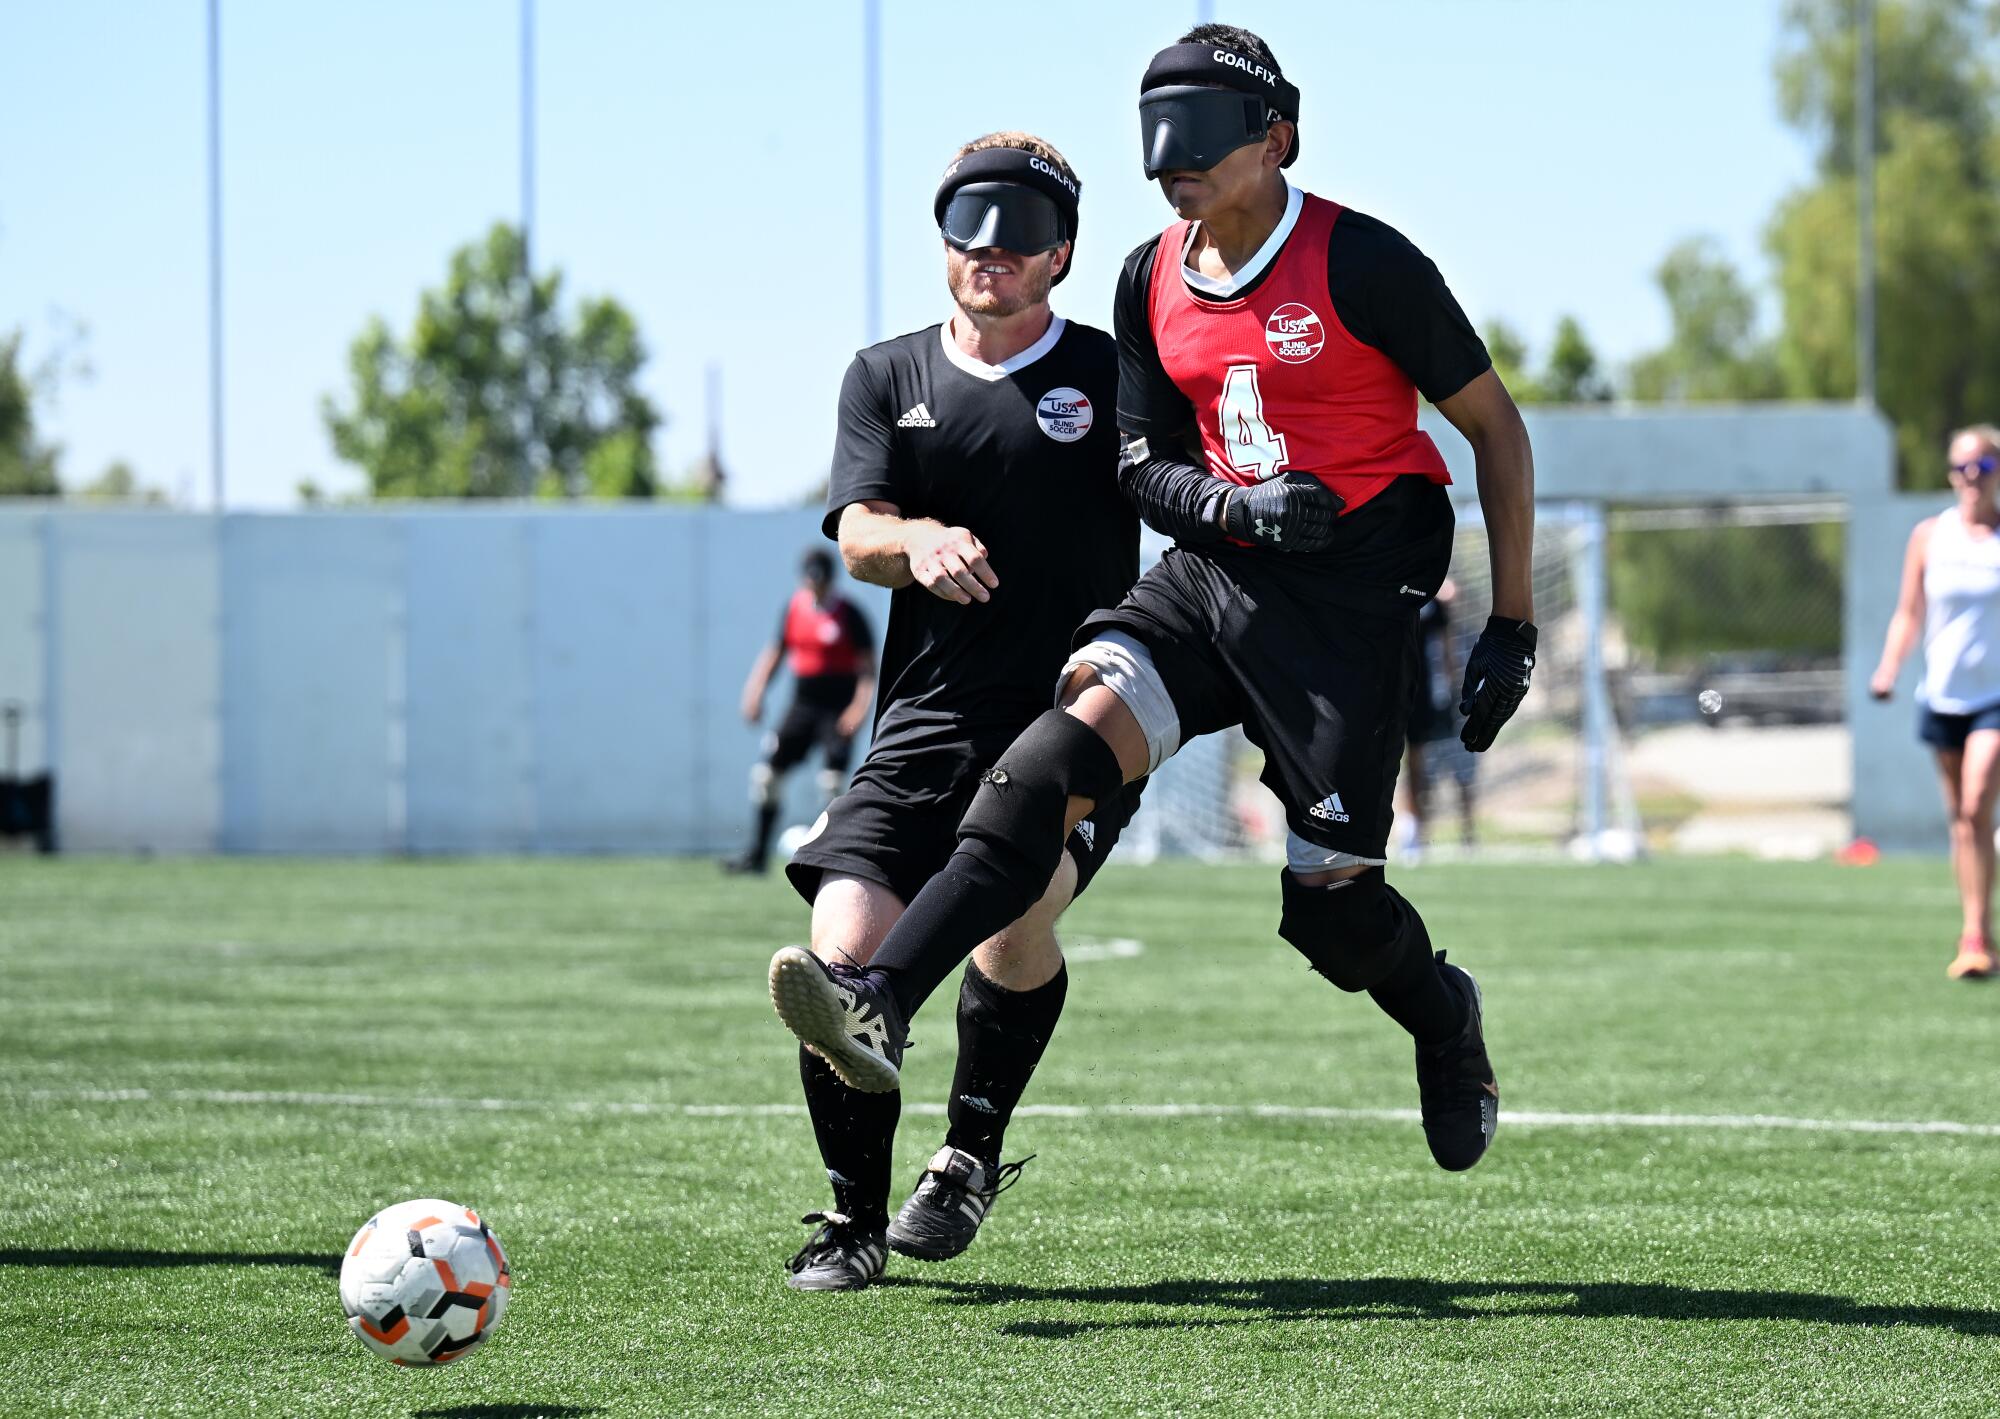 Blind soccer player Ricardo Castaneda takes a shot while running past Noah Beckman during a scrimmage 